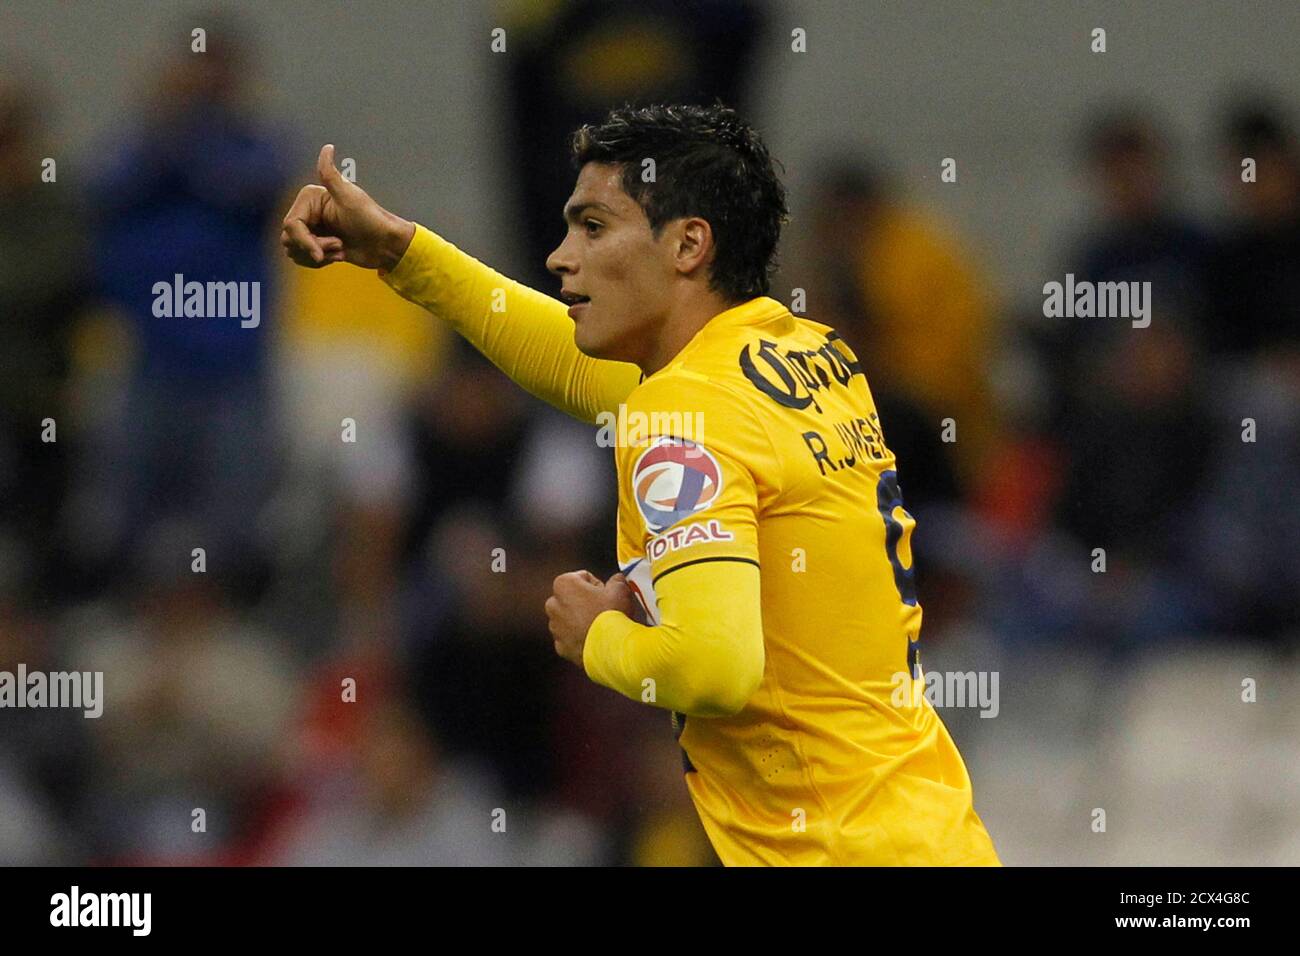 Raul Jimenez of Mexico's Club America celebrates his goal against Panama's  Sporting San Miguelito during their CONCACAF Champions League soccer match  at Azteca stadium in Mexico City September 17, 2013. REUTERS/Edgard Garrido  (